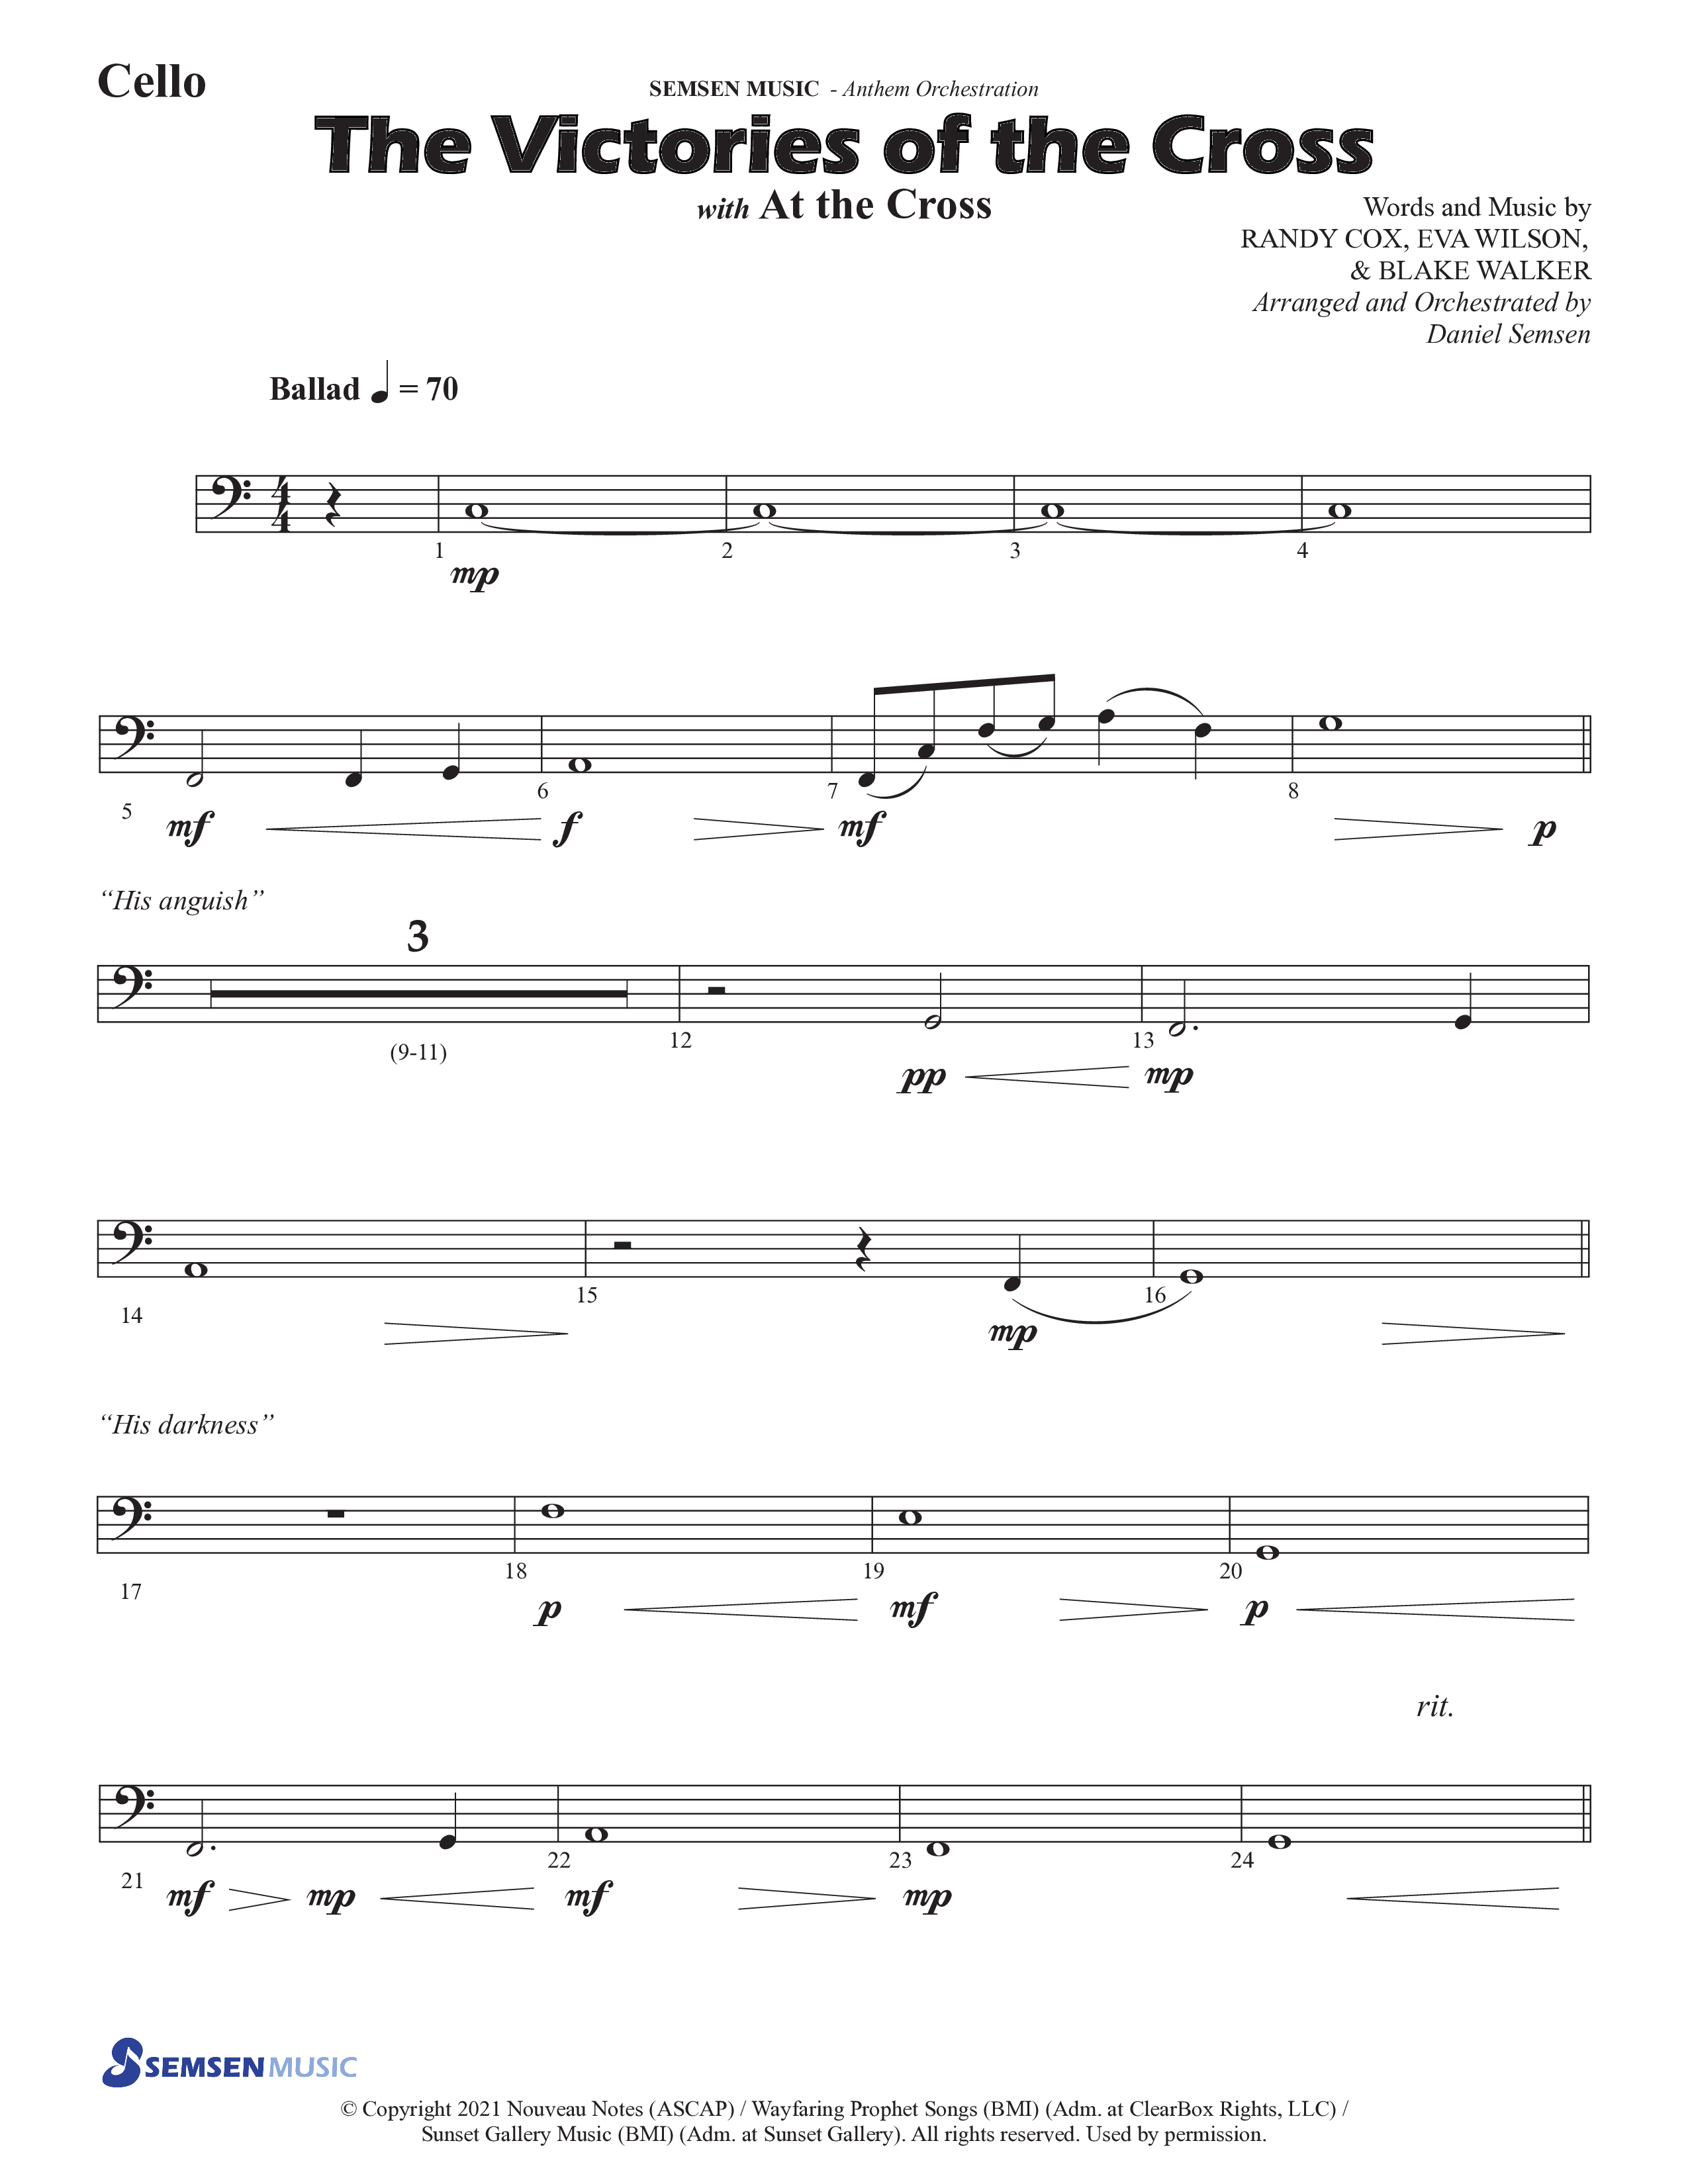 The Victories Of The Cross (with At The Cross) (Choral Anthem SATB) Cello (Semsen Music / Arr. Daniel Semsen)